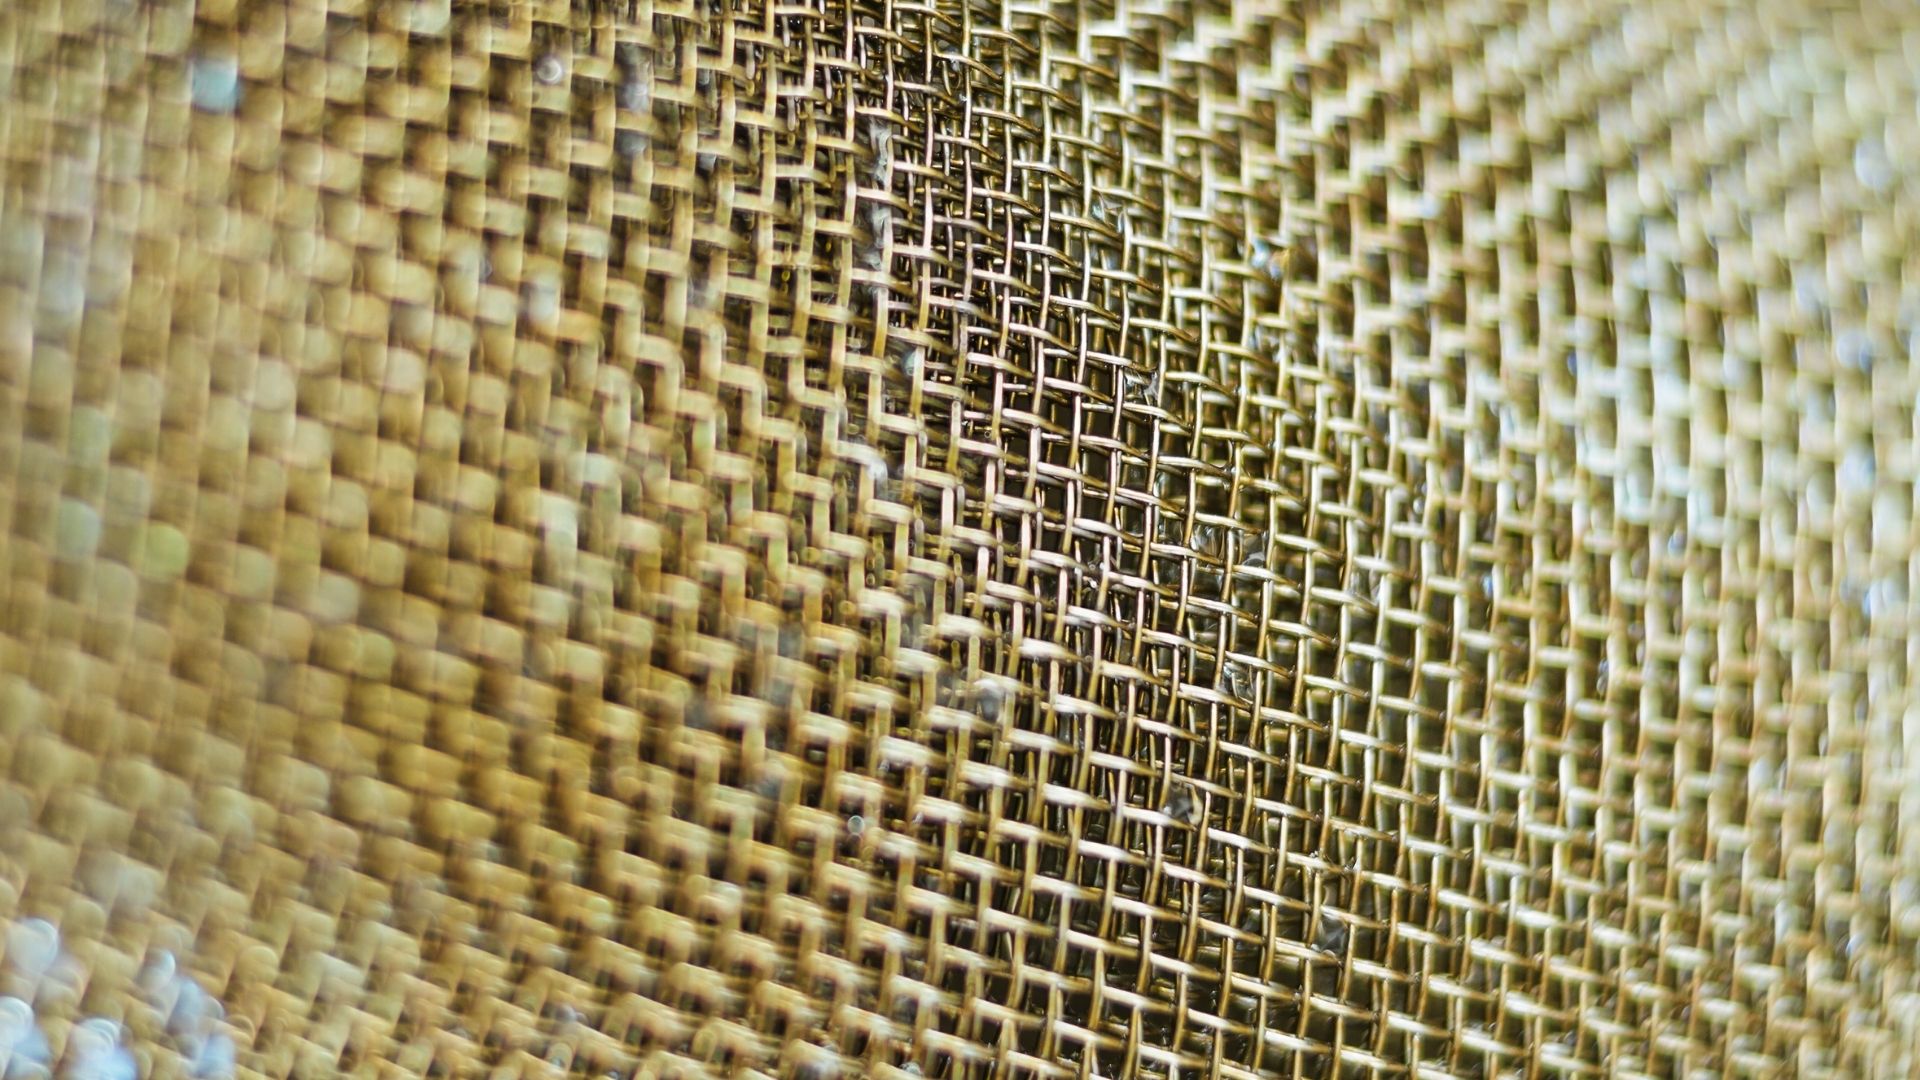 Woven brass wire mesh material.